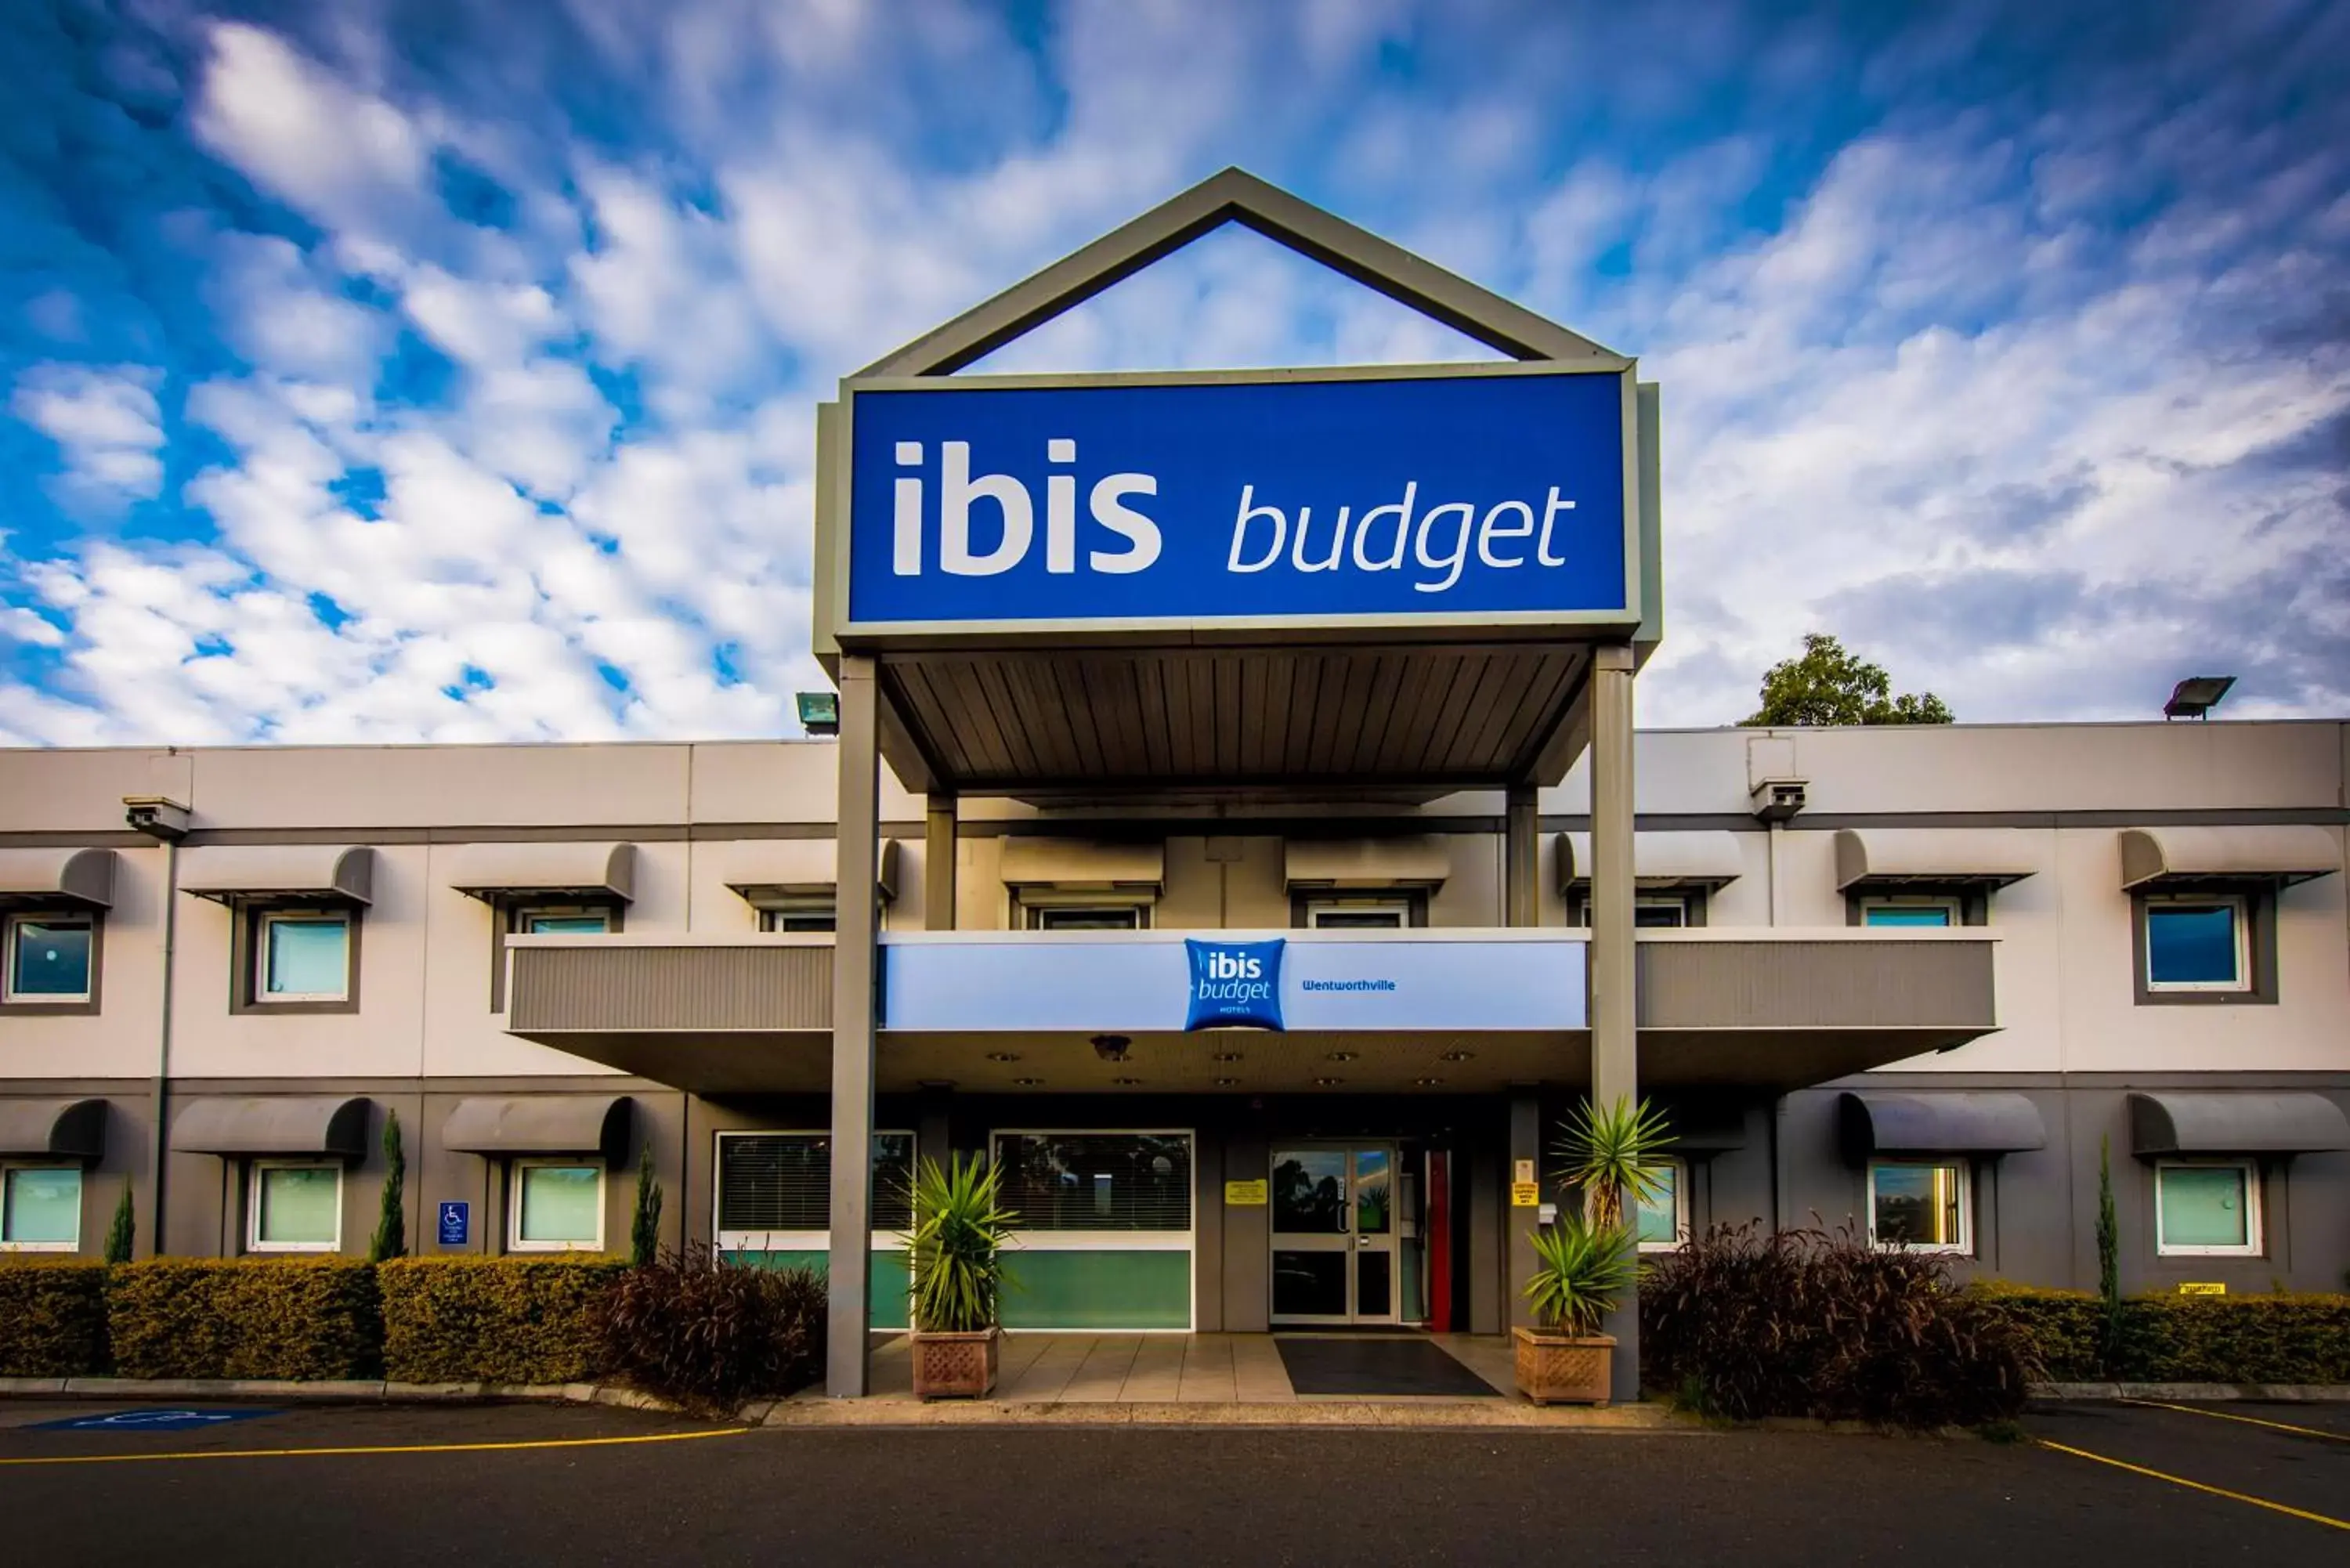 Property building, Facade/Entrance in ibis Budget Wentworthville